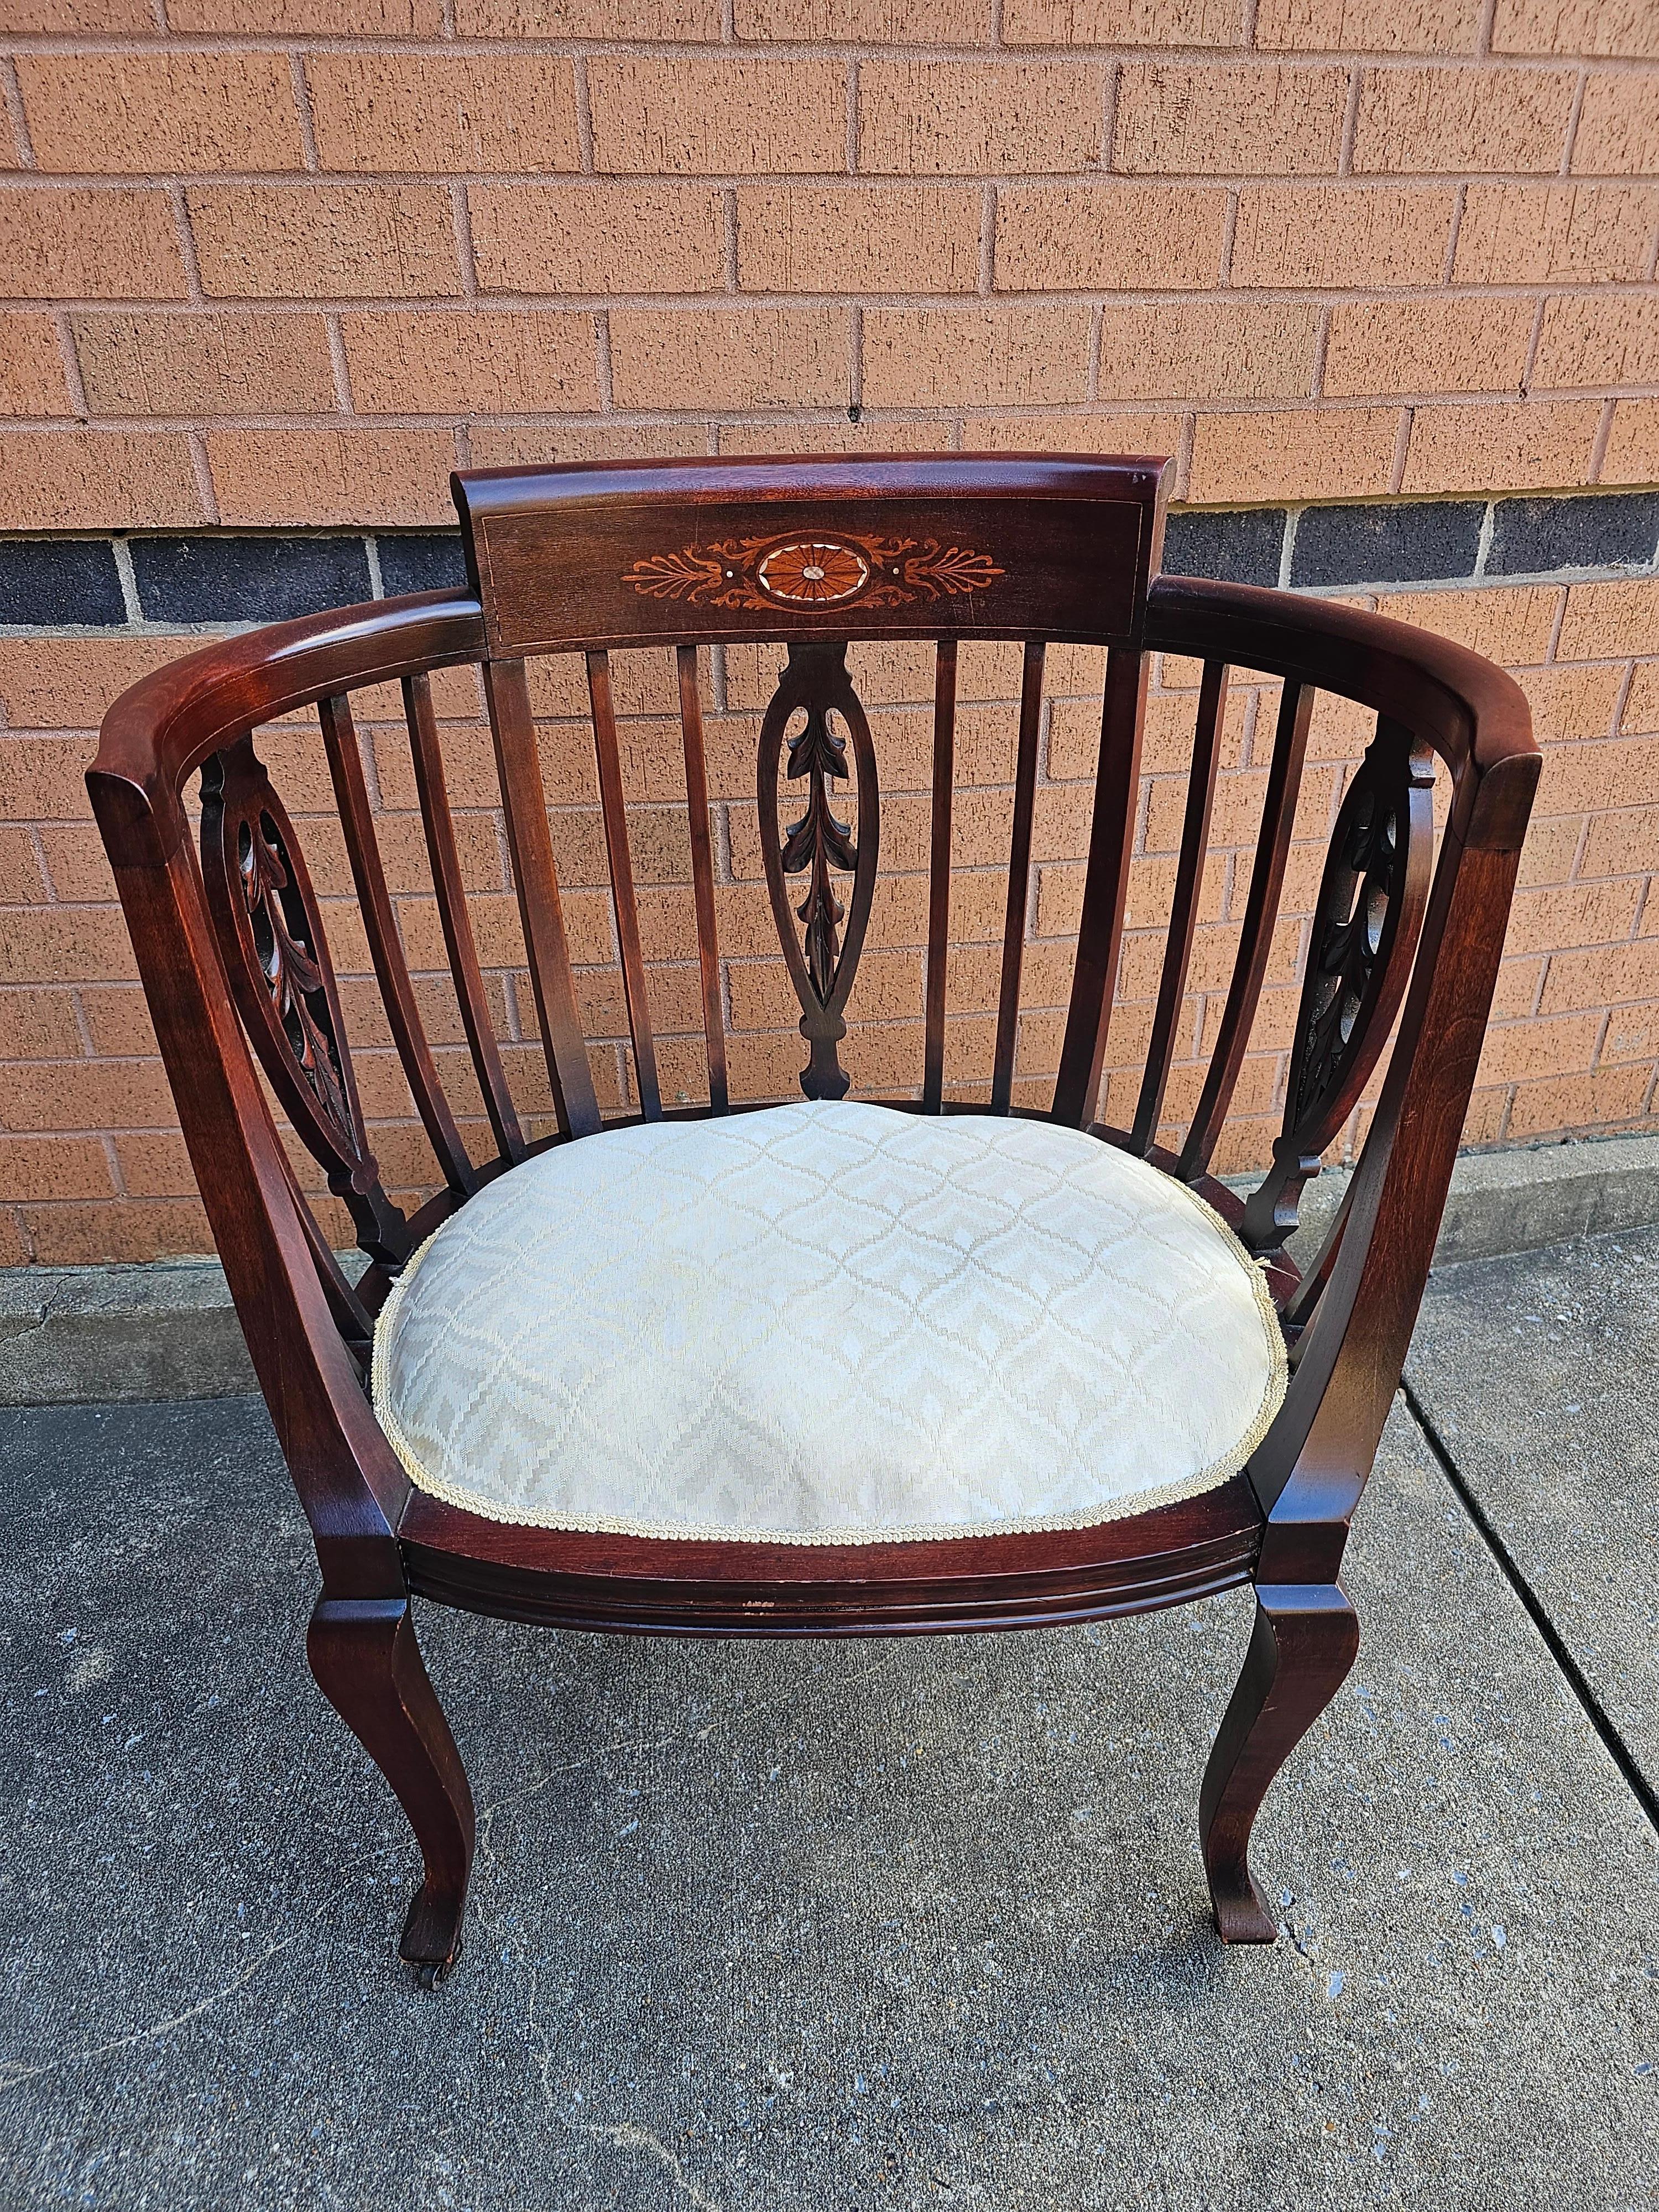 Early 20th Century Edwardian Inlaid Mahogany and Upholstered Seat Barrel Chair For Sale 3